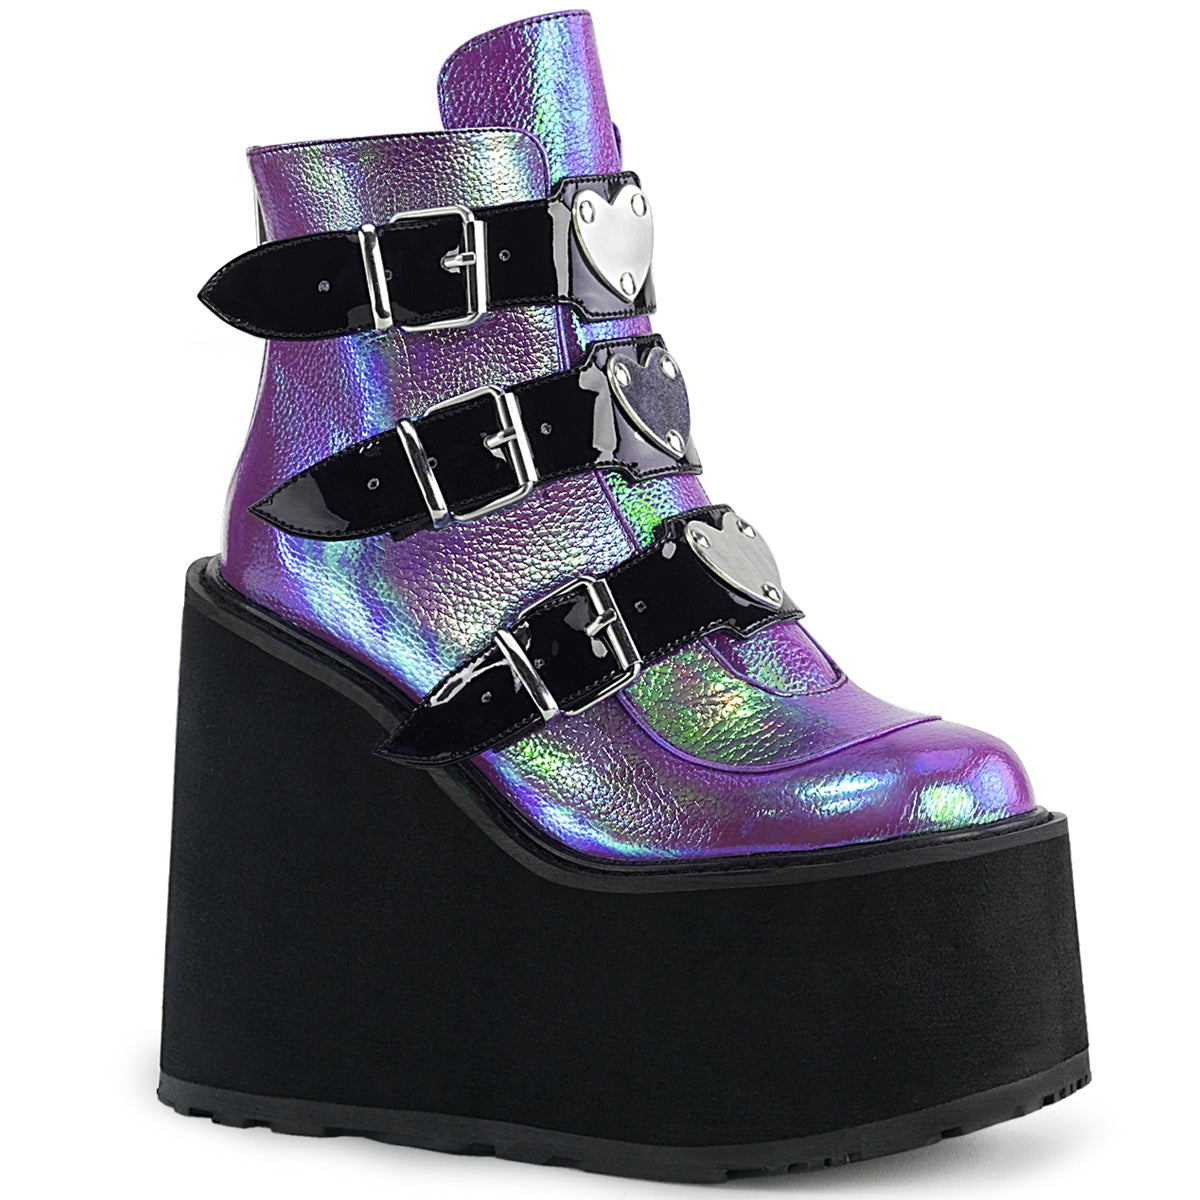 DemoniaCult Womens Ankle Boots SWING-105 Purple Iridescent Vegan Leather